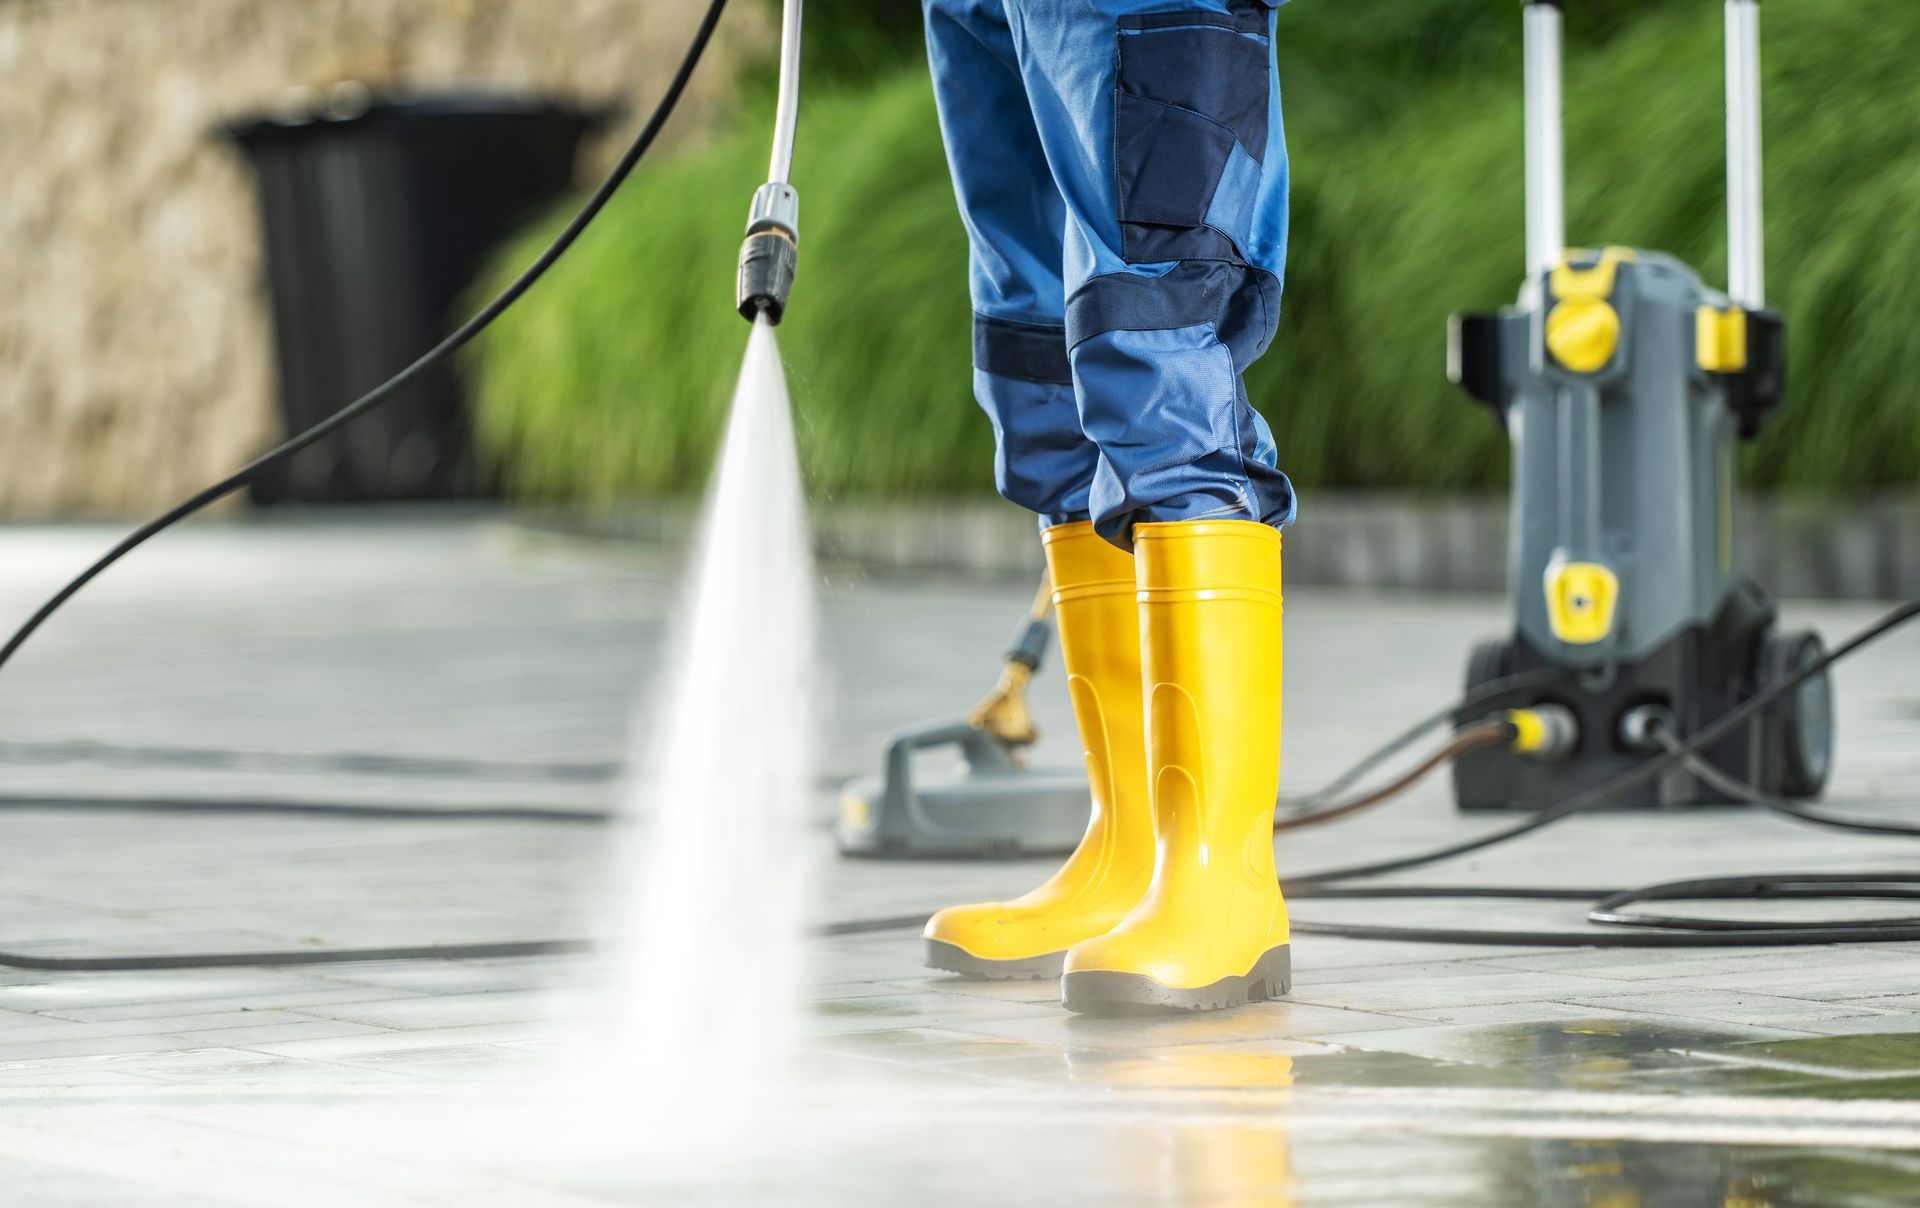 A person wearing yellow boots is using a high pressure washer on a concrete surface.